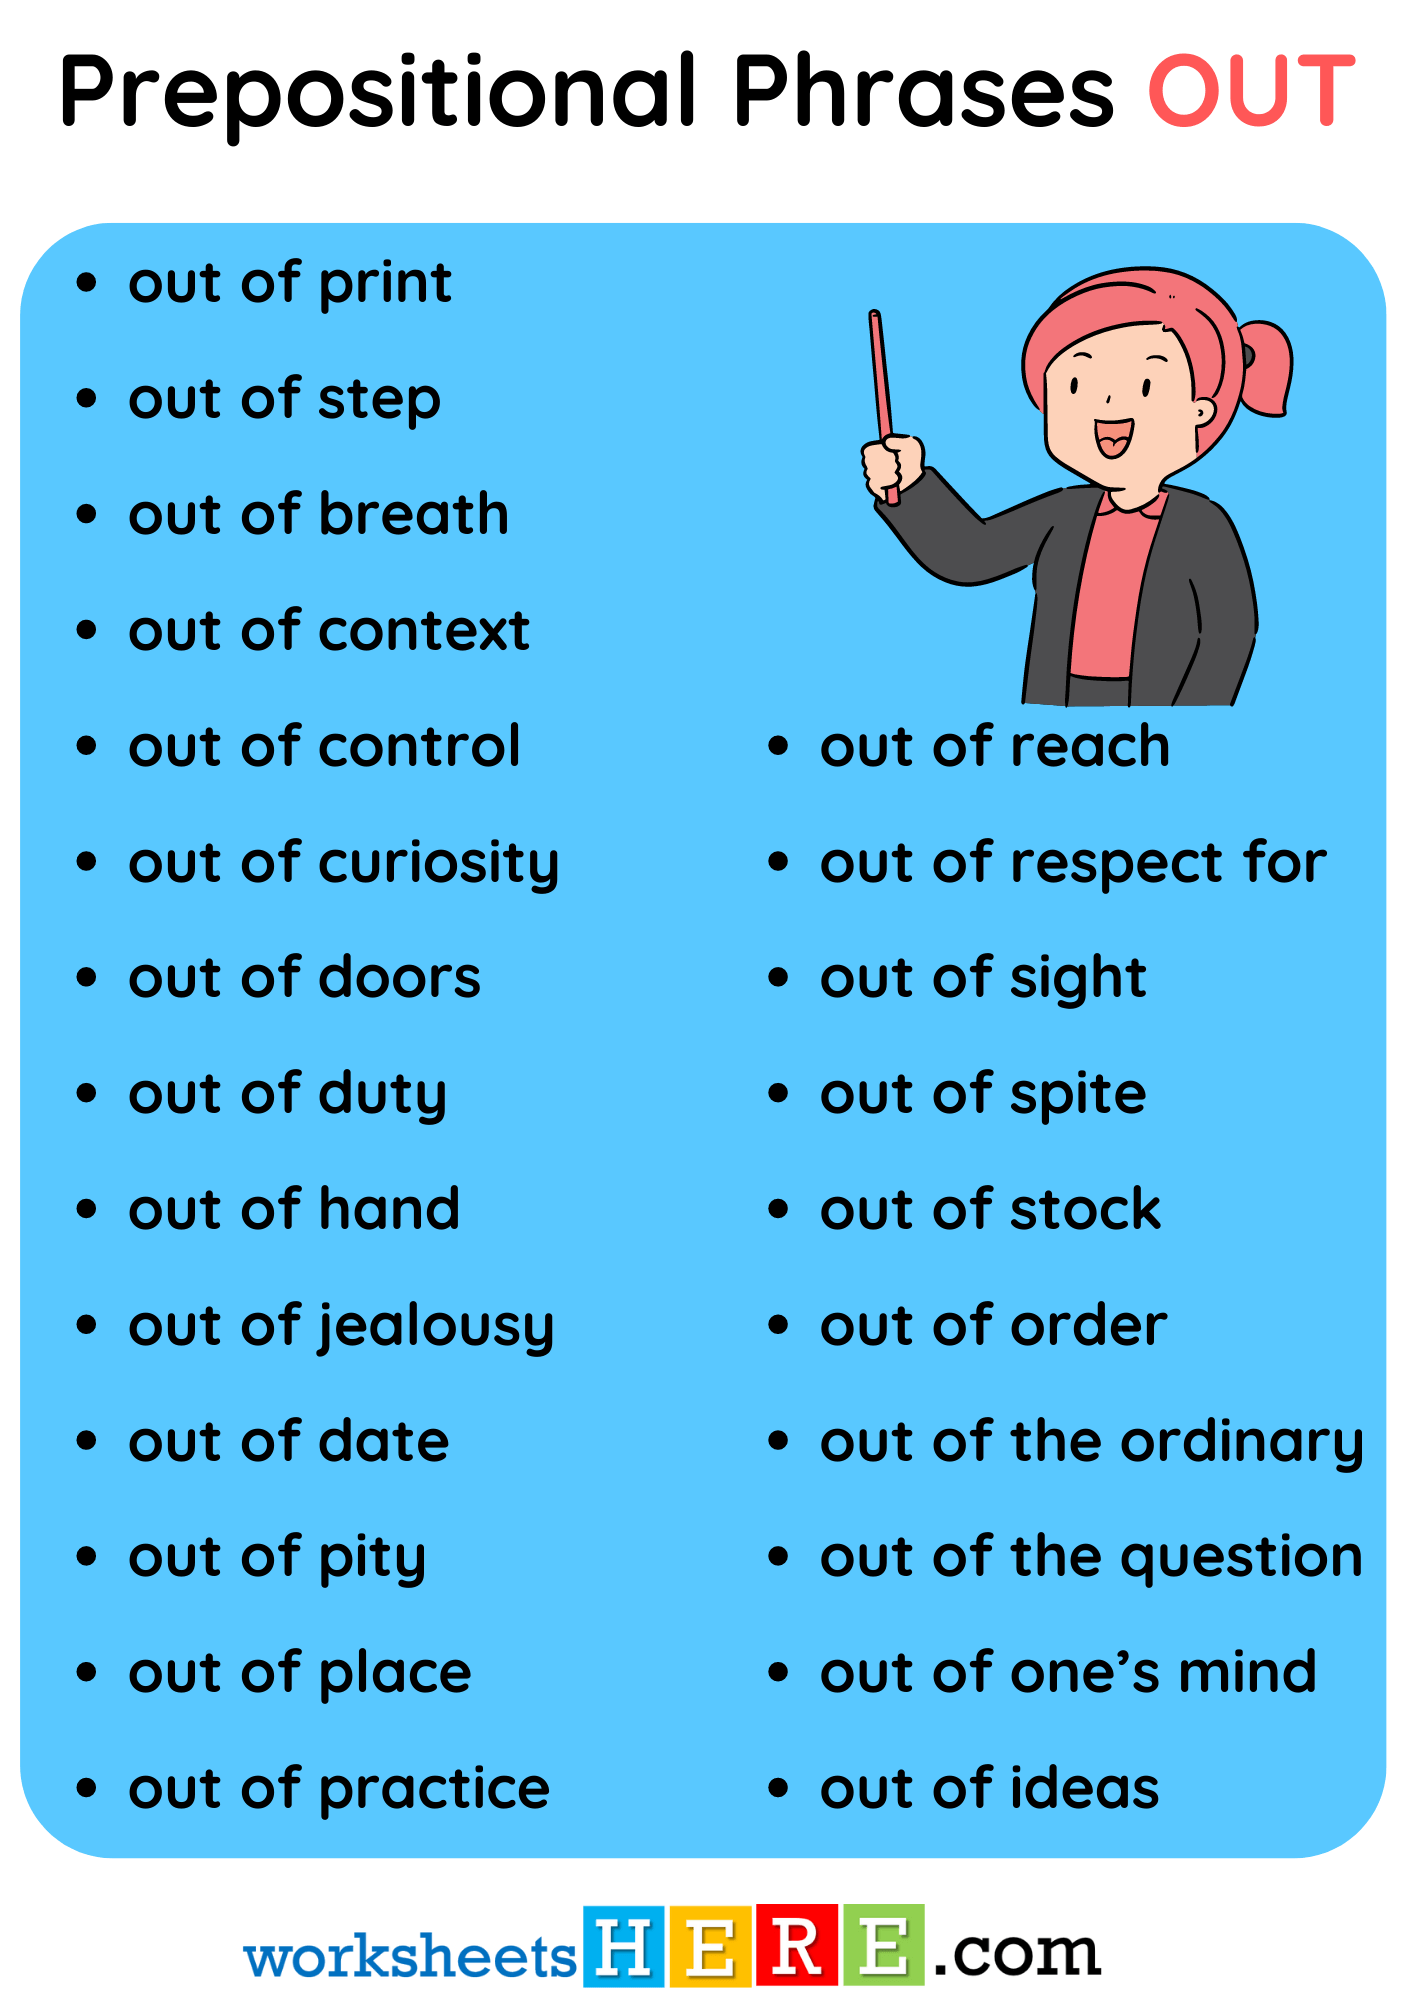 Prepositional Phrases OUT and Example Sentences PDF Worksheet For Students